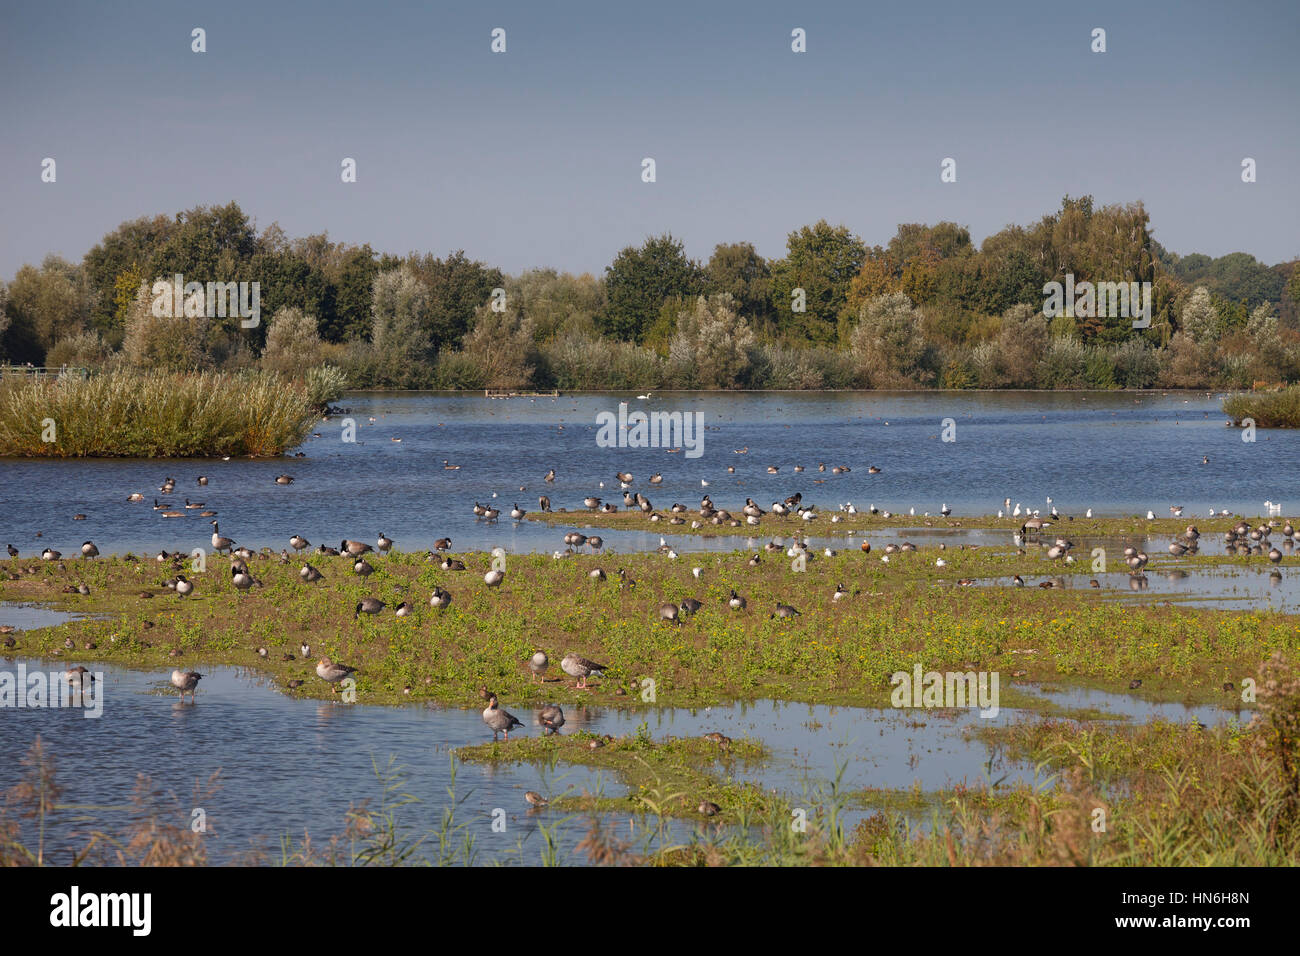 Birds and geese, bird reserve, nature reserve, septic drain fields, Münster, Münsterland, North Rhine-Westphalia, Germany Stock Photo